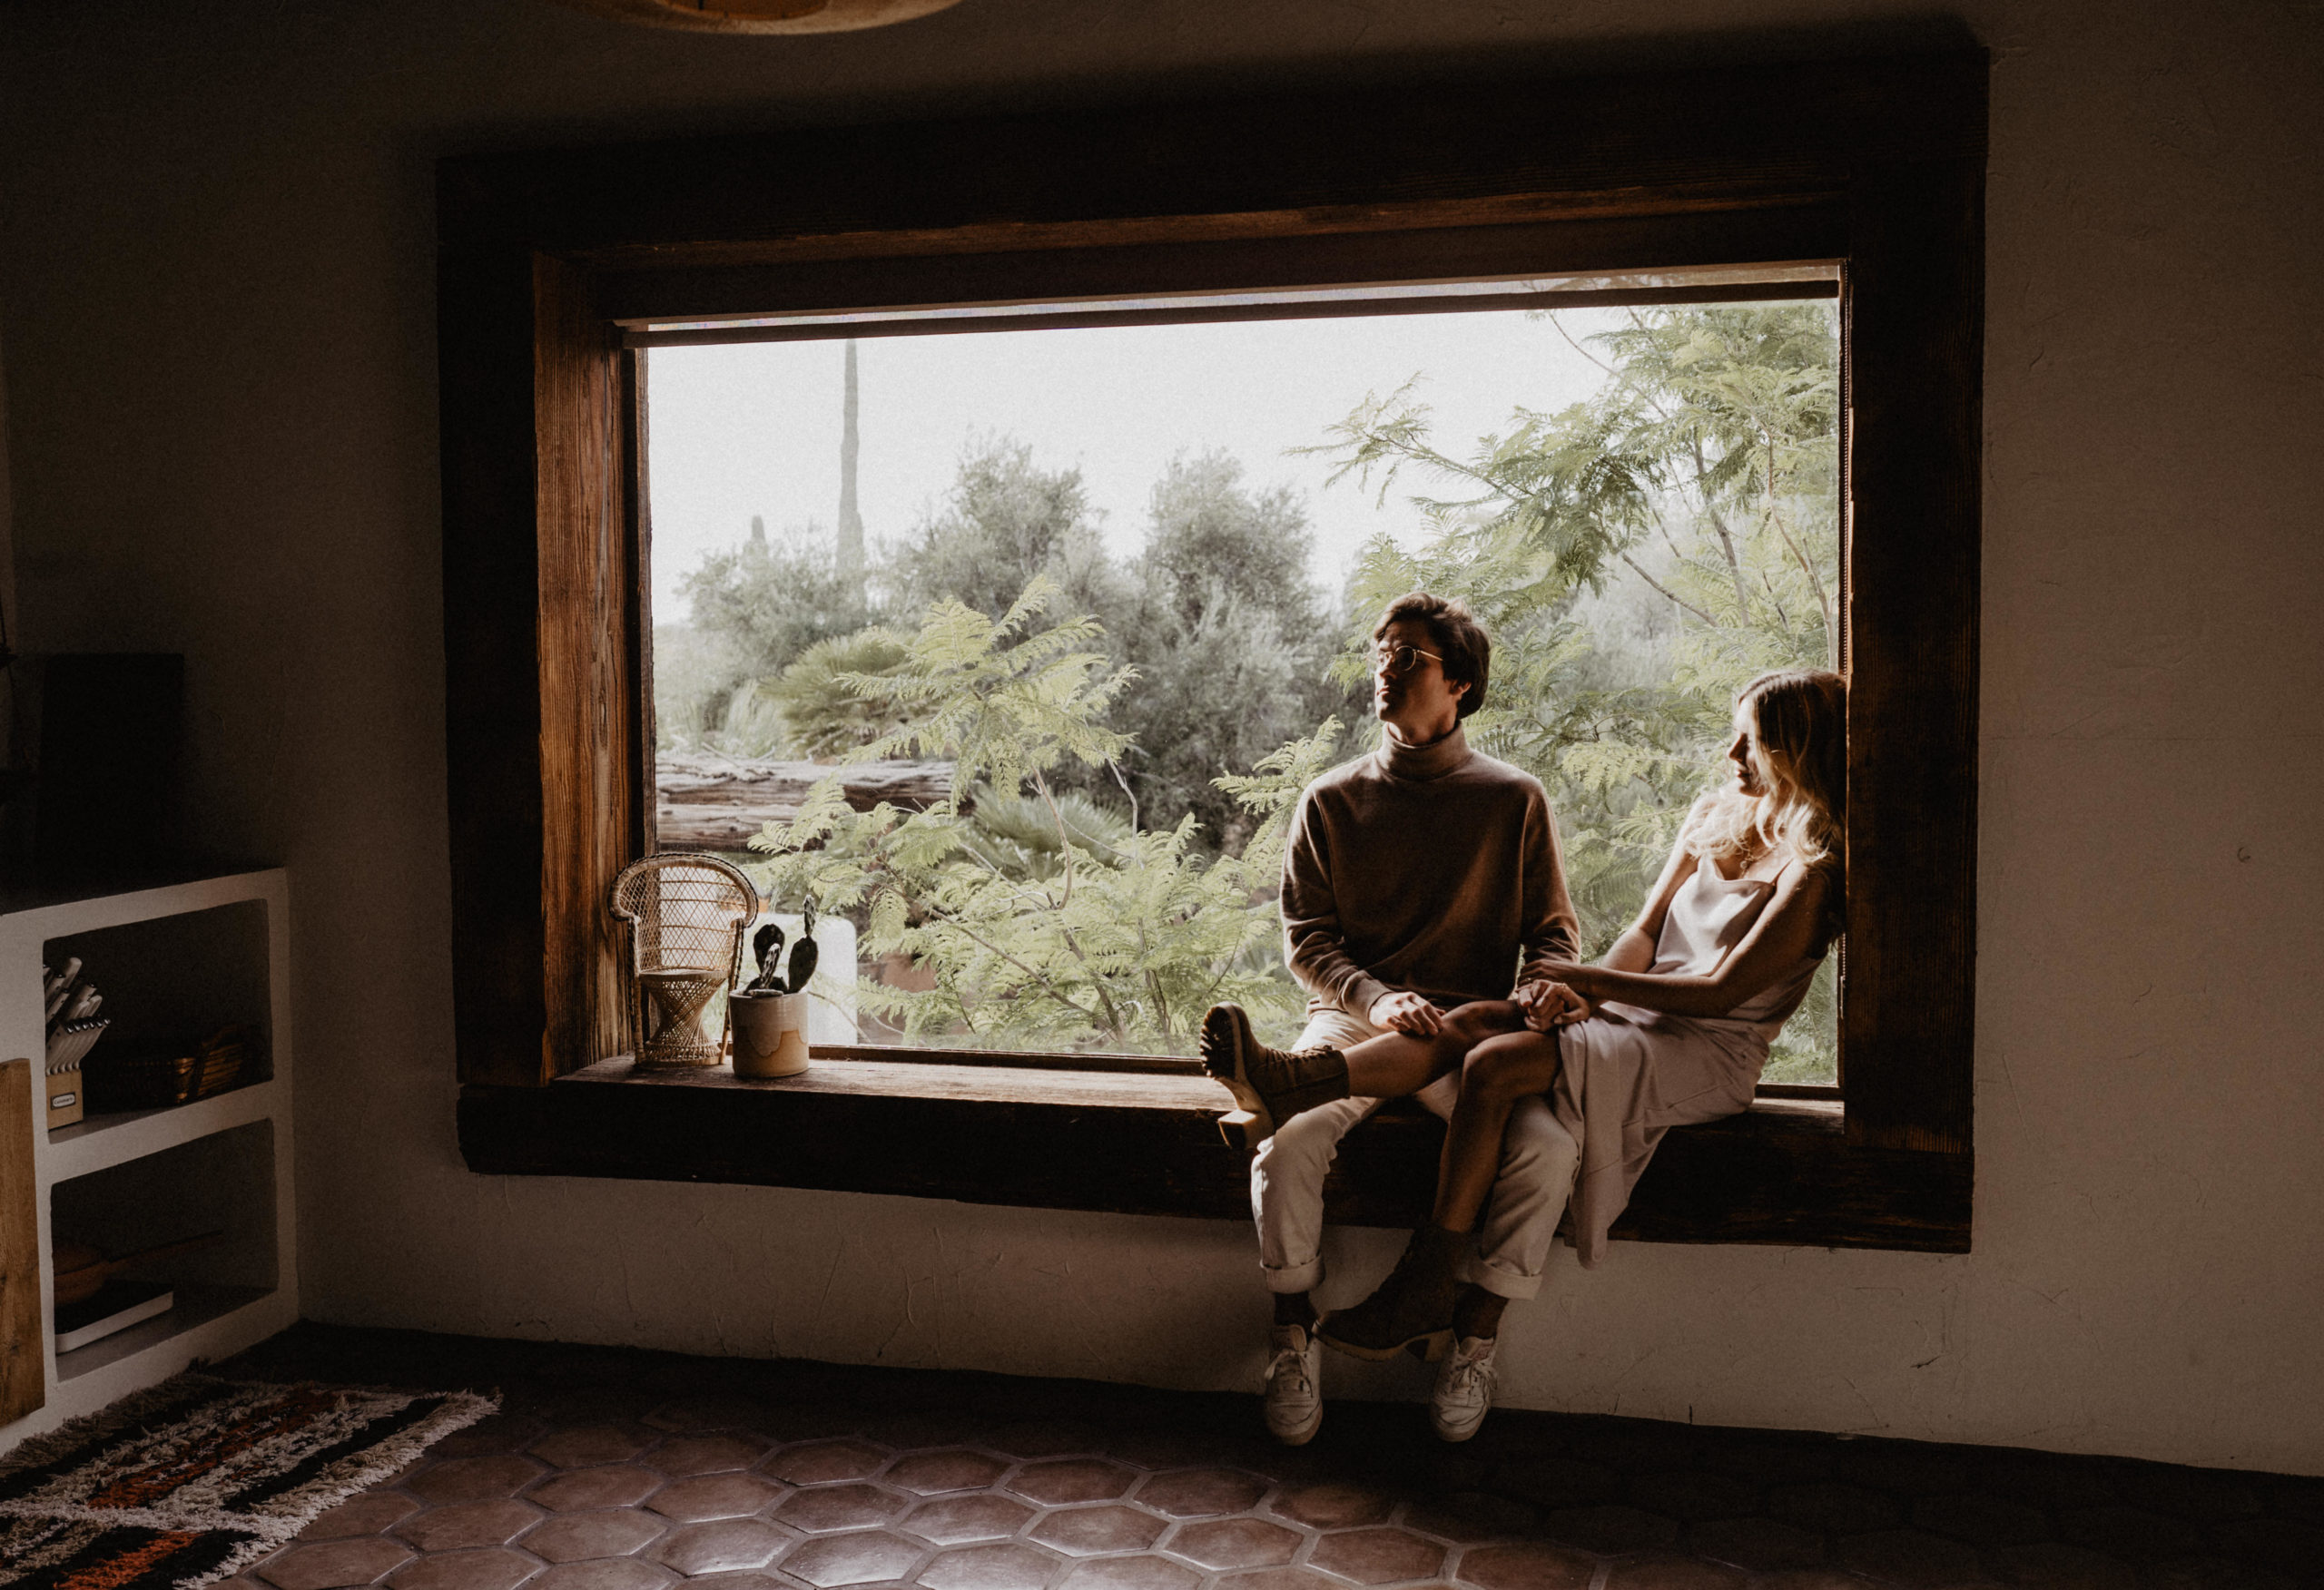 Couple sitting in a window with trees in the background.